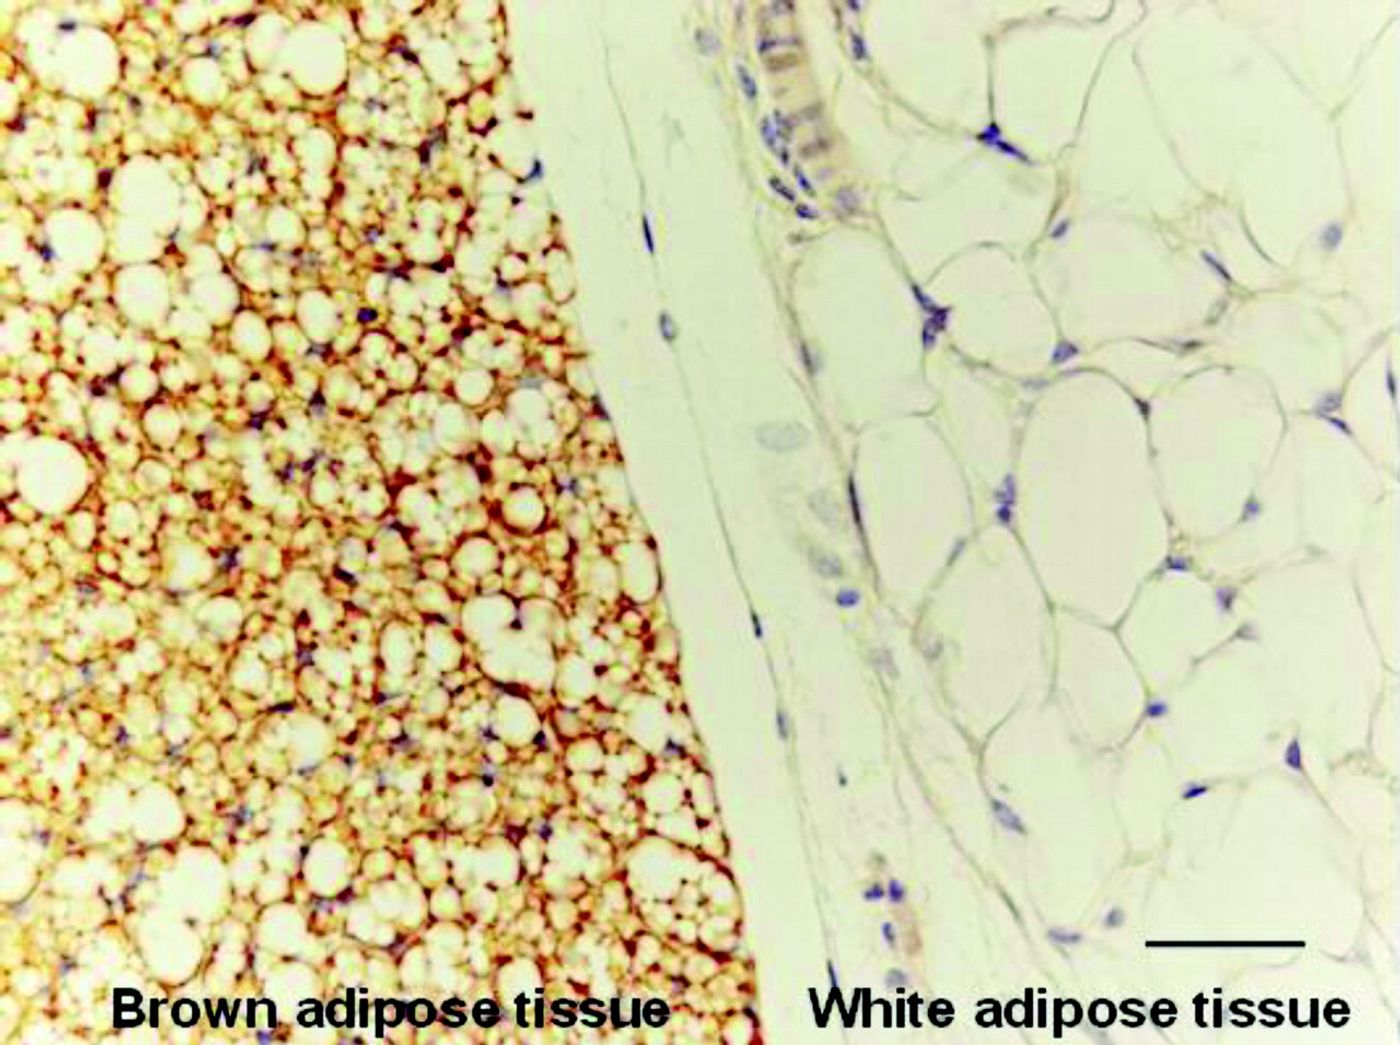 The difference between brown and white fat cells. Credit: Susan Ardizzoni.